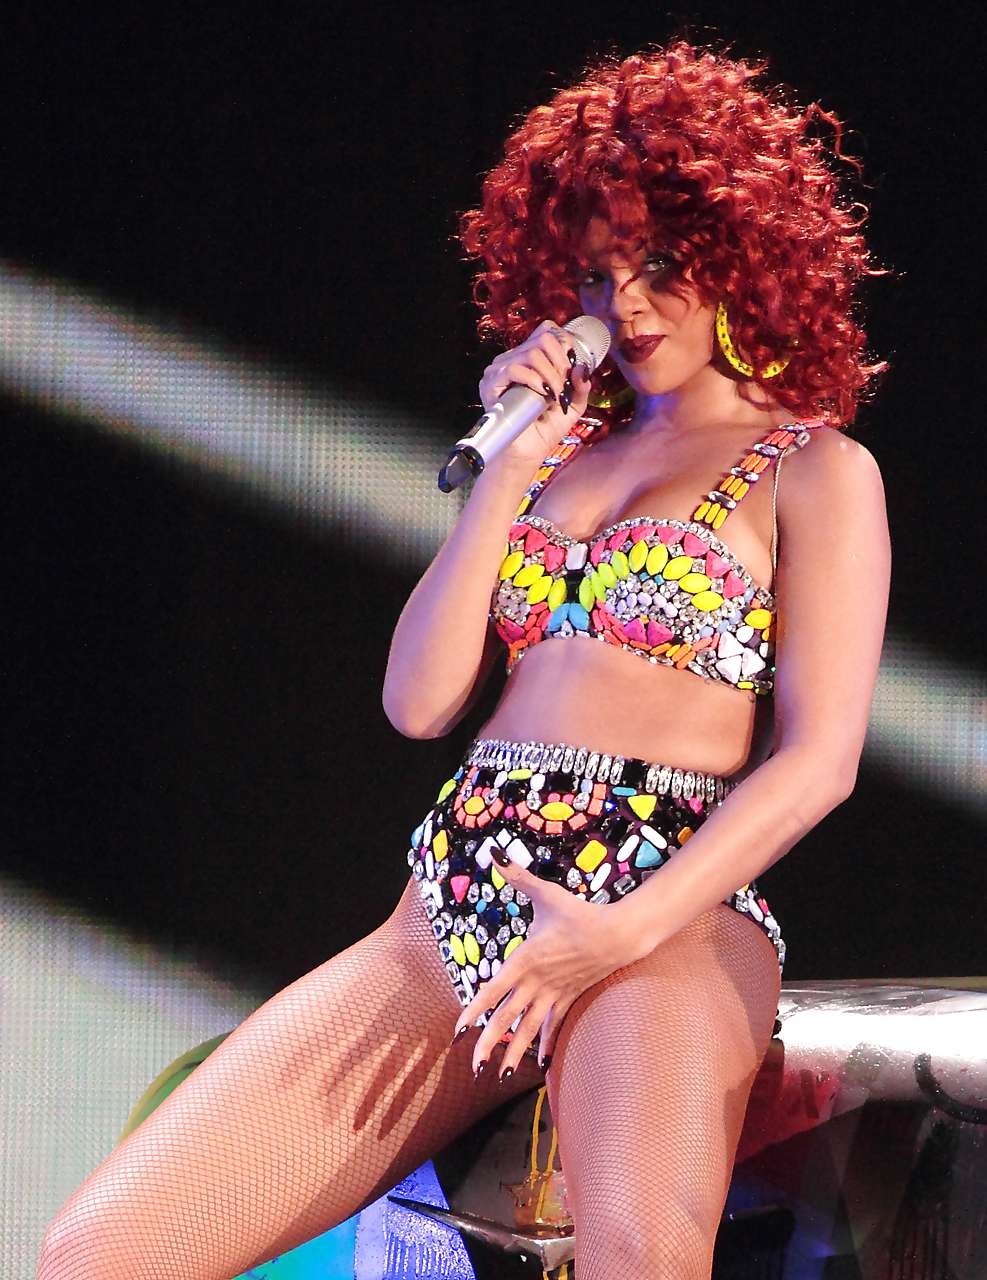 Rihanna in shorts and fishnets performing on stage paparazzi pictures #75301030